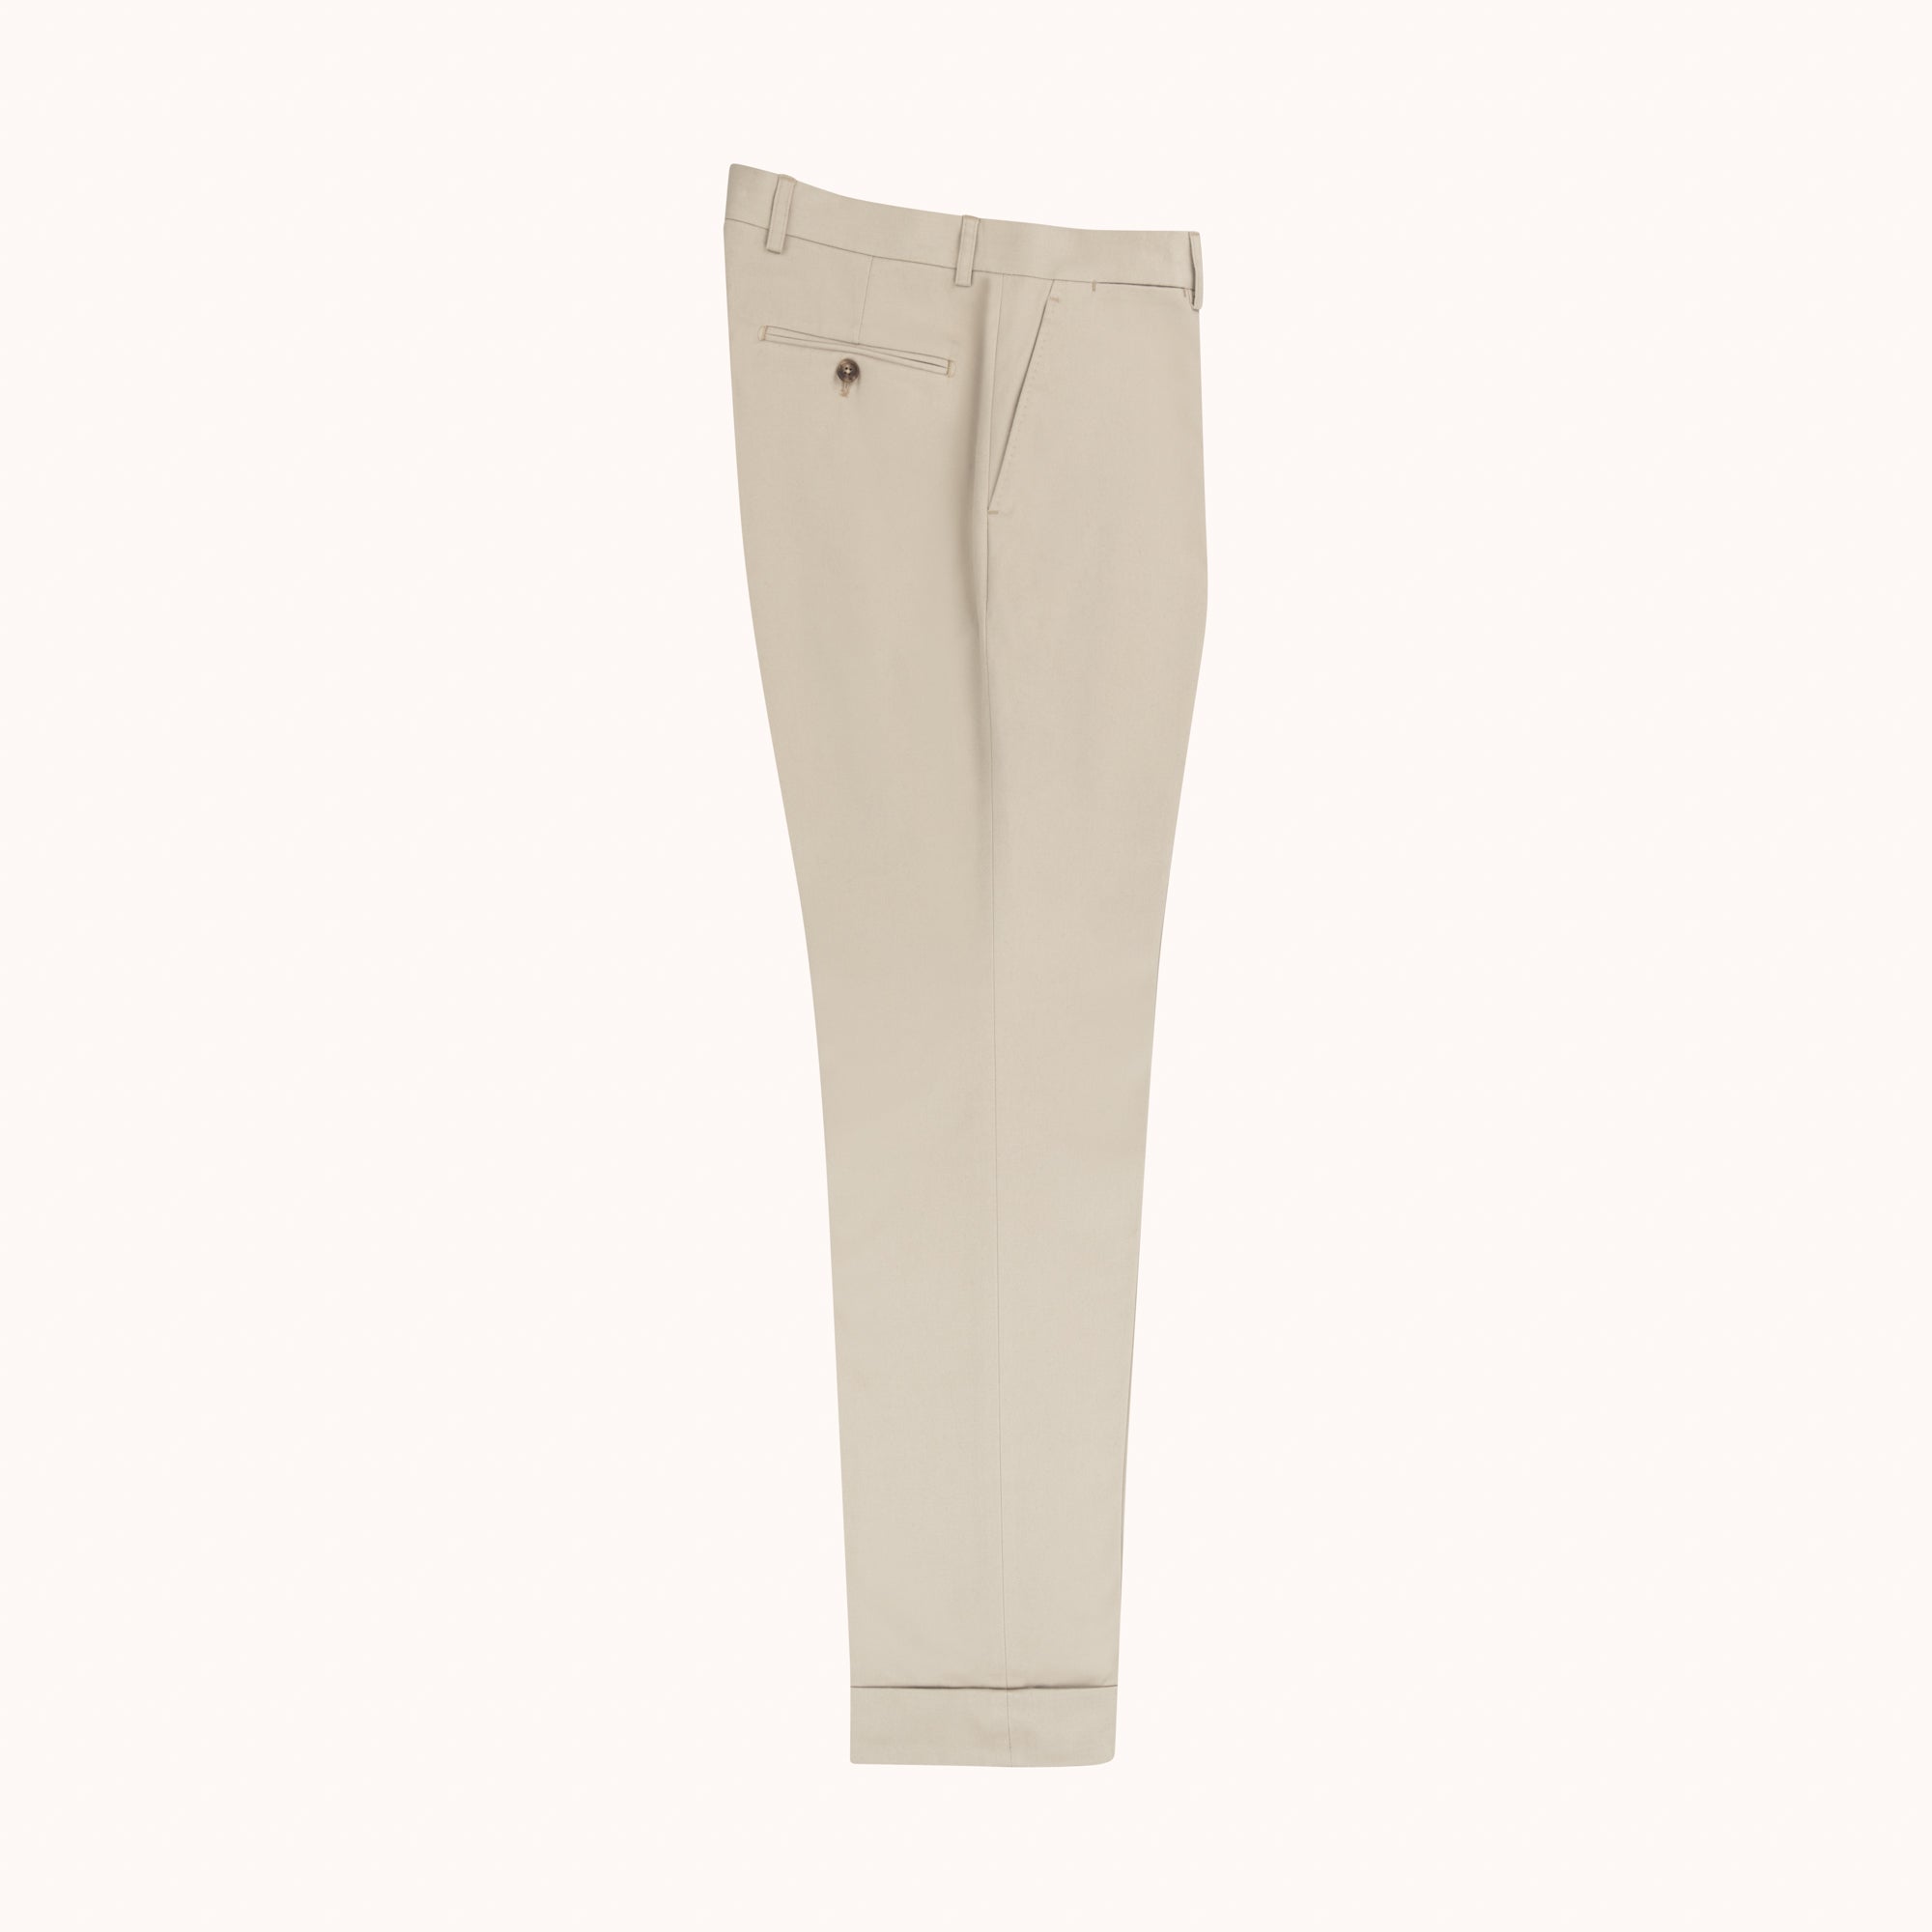 Beige Bamboo Flat Front Trouser With Side Adjuster